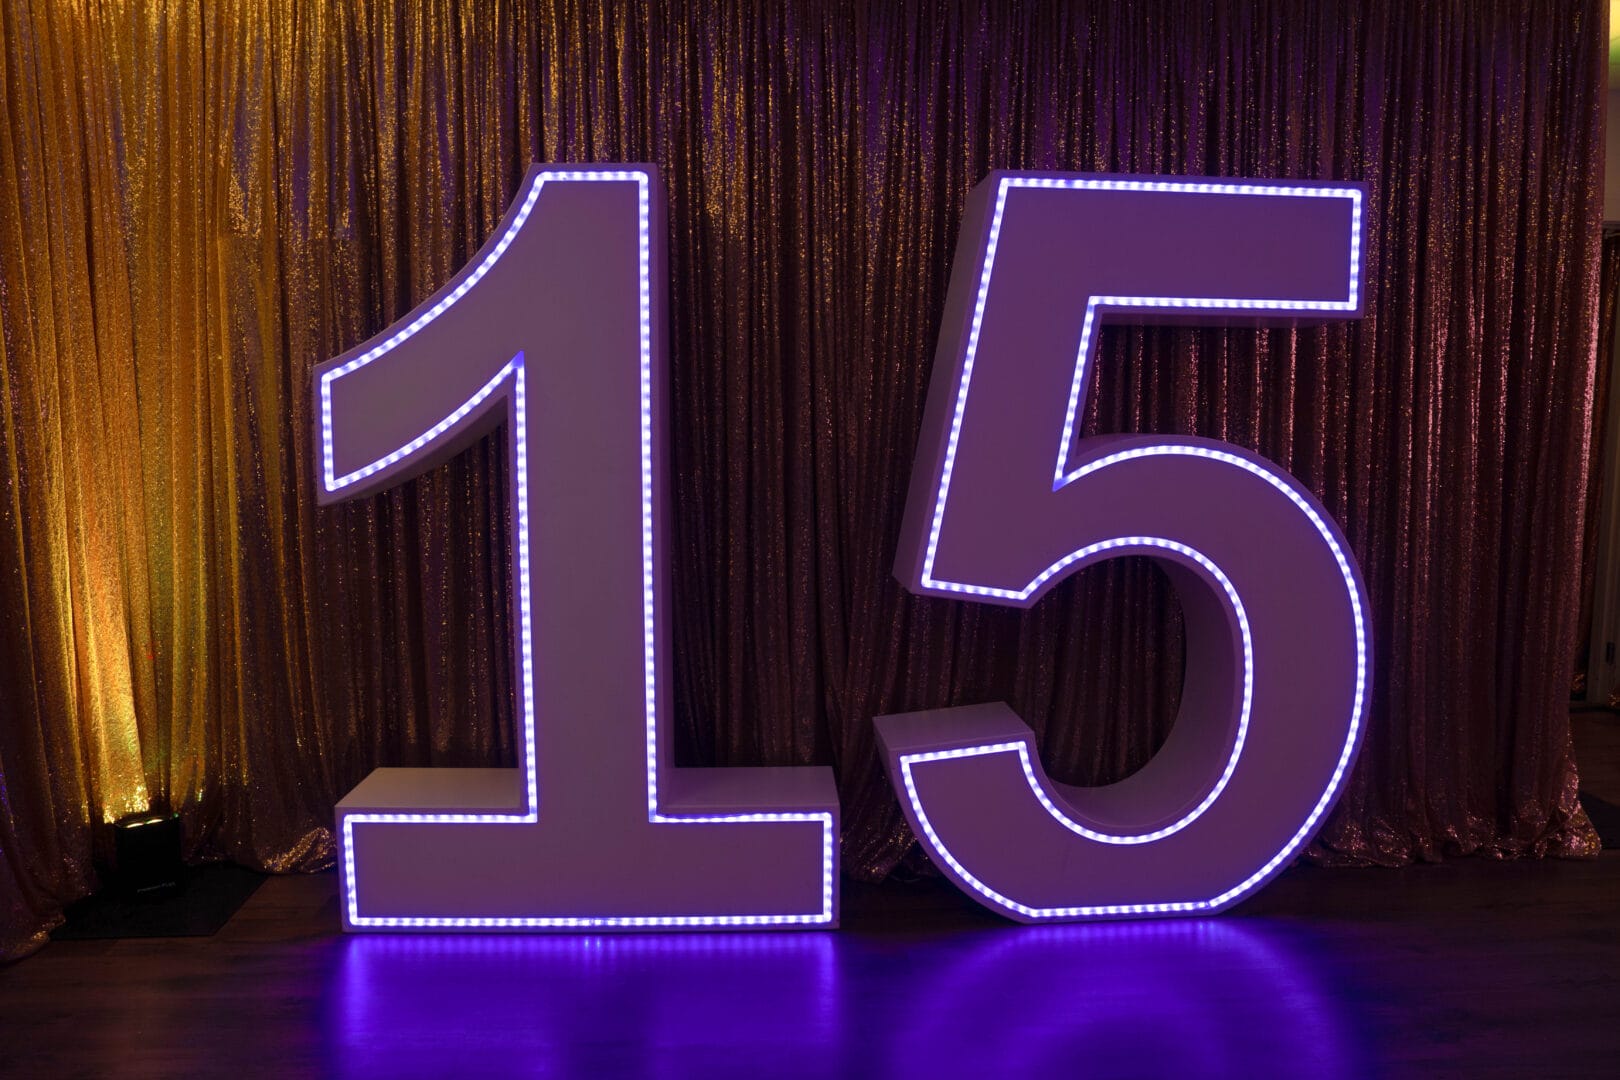 light up 15 numbers at willy wonka themed party